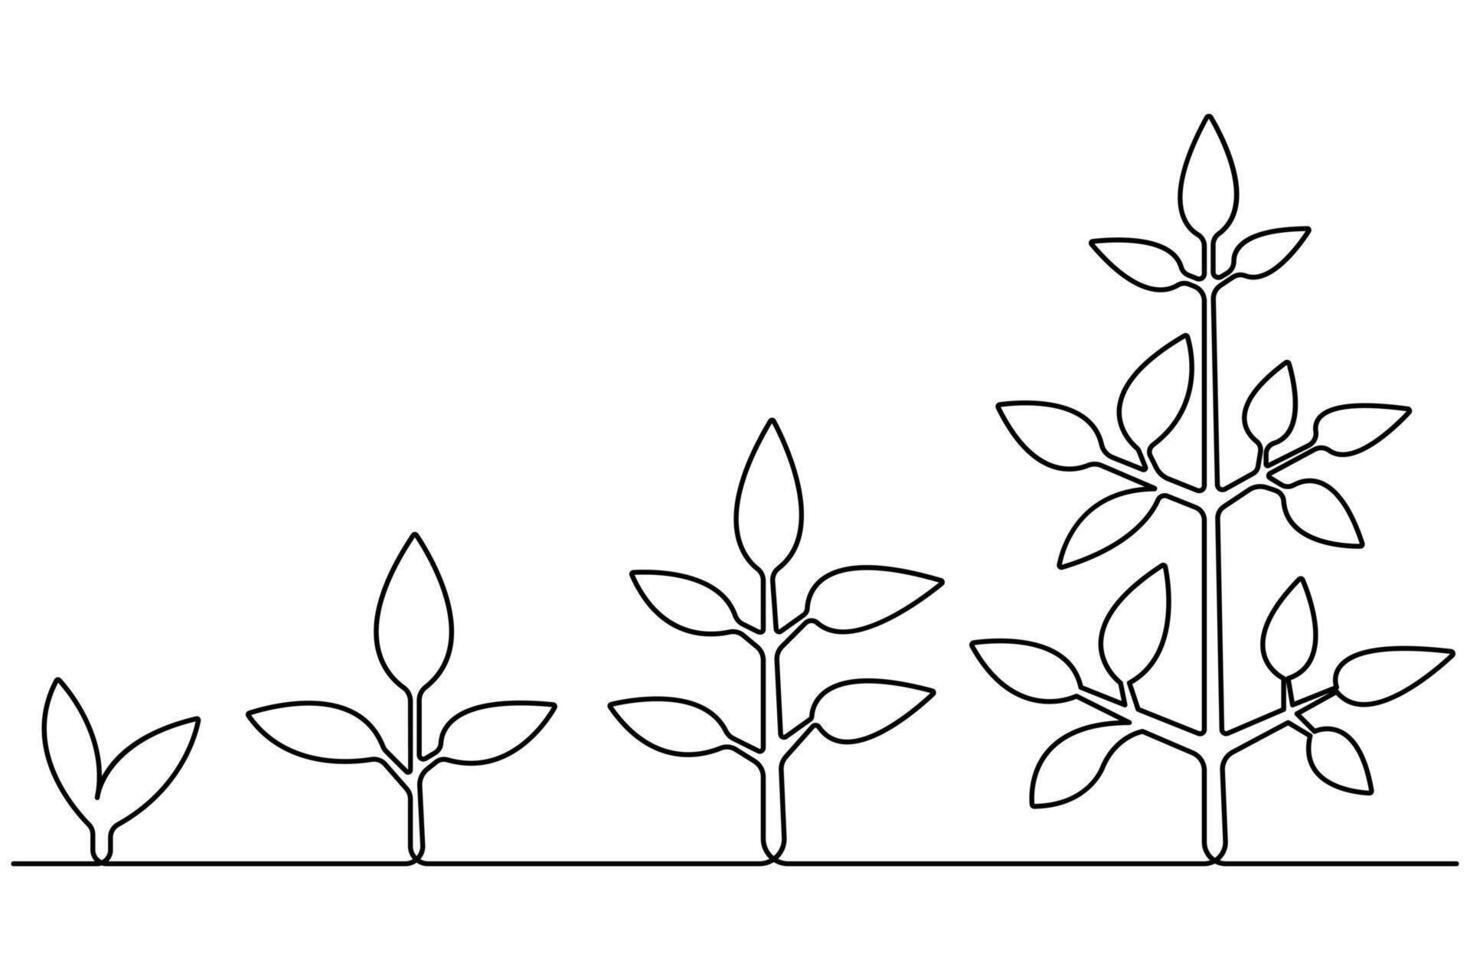 Plant growing continuous one line art drawing of tree plant outline vector illustration